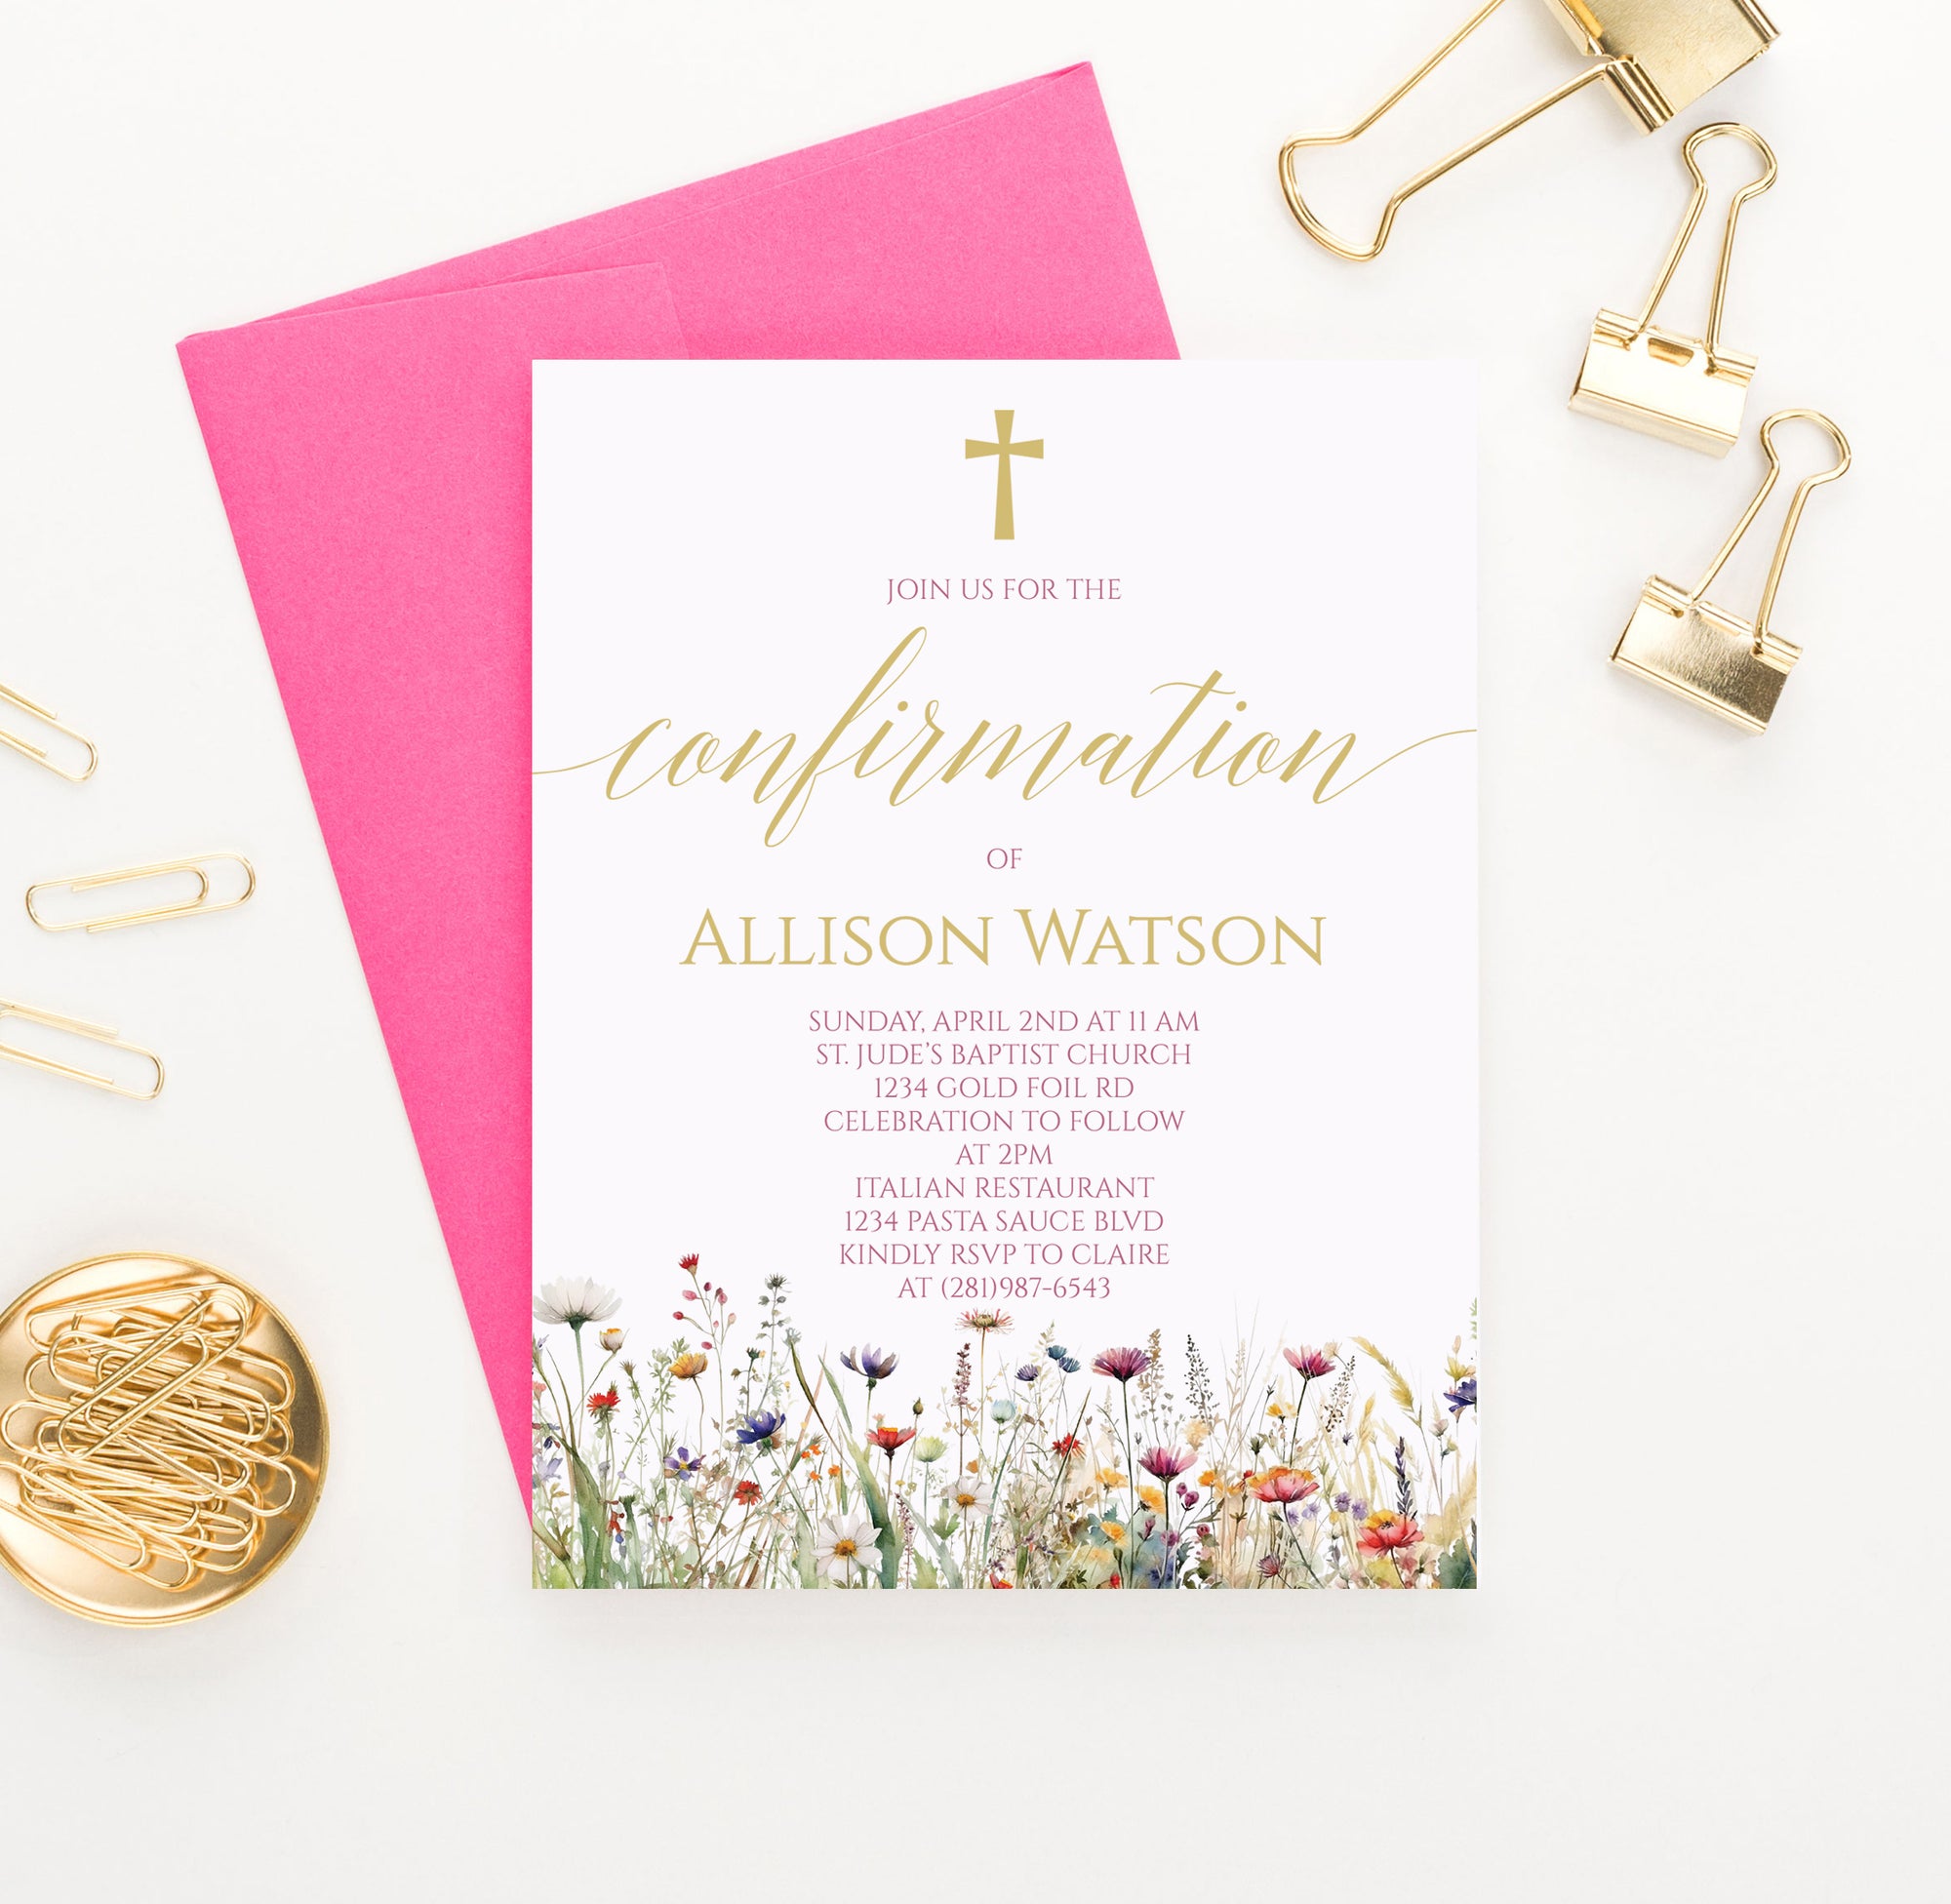 Custom Confirmation Invitations With Wildflowers